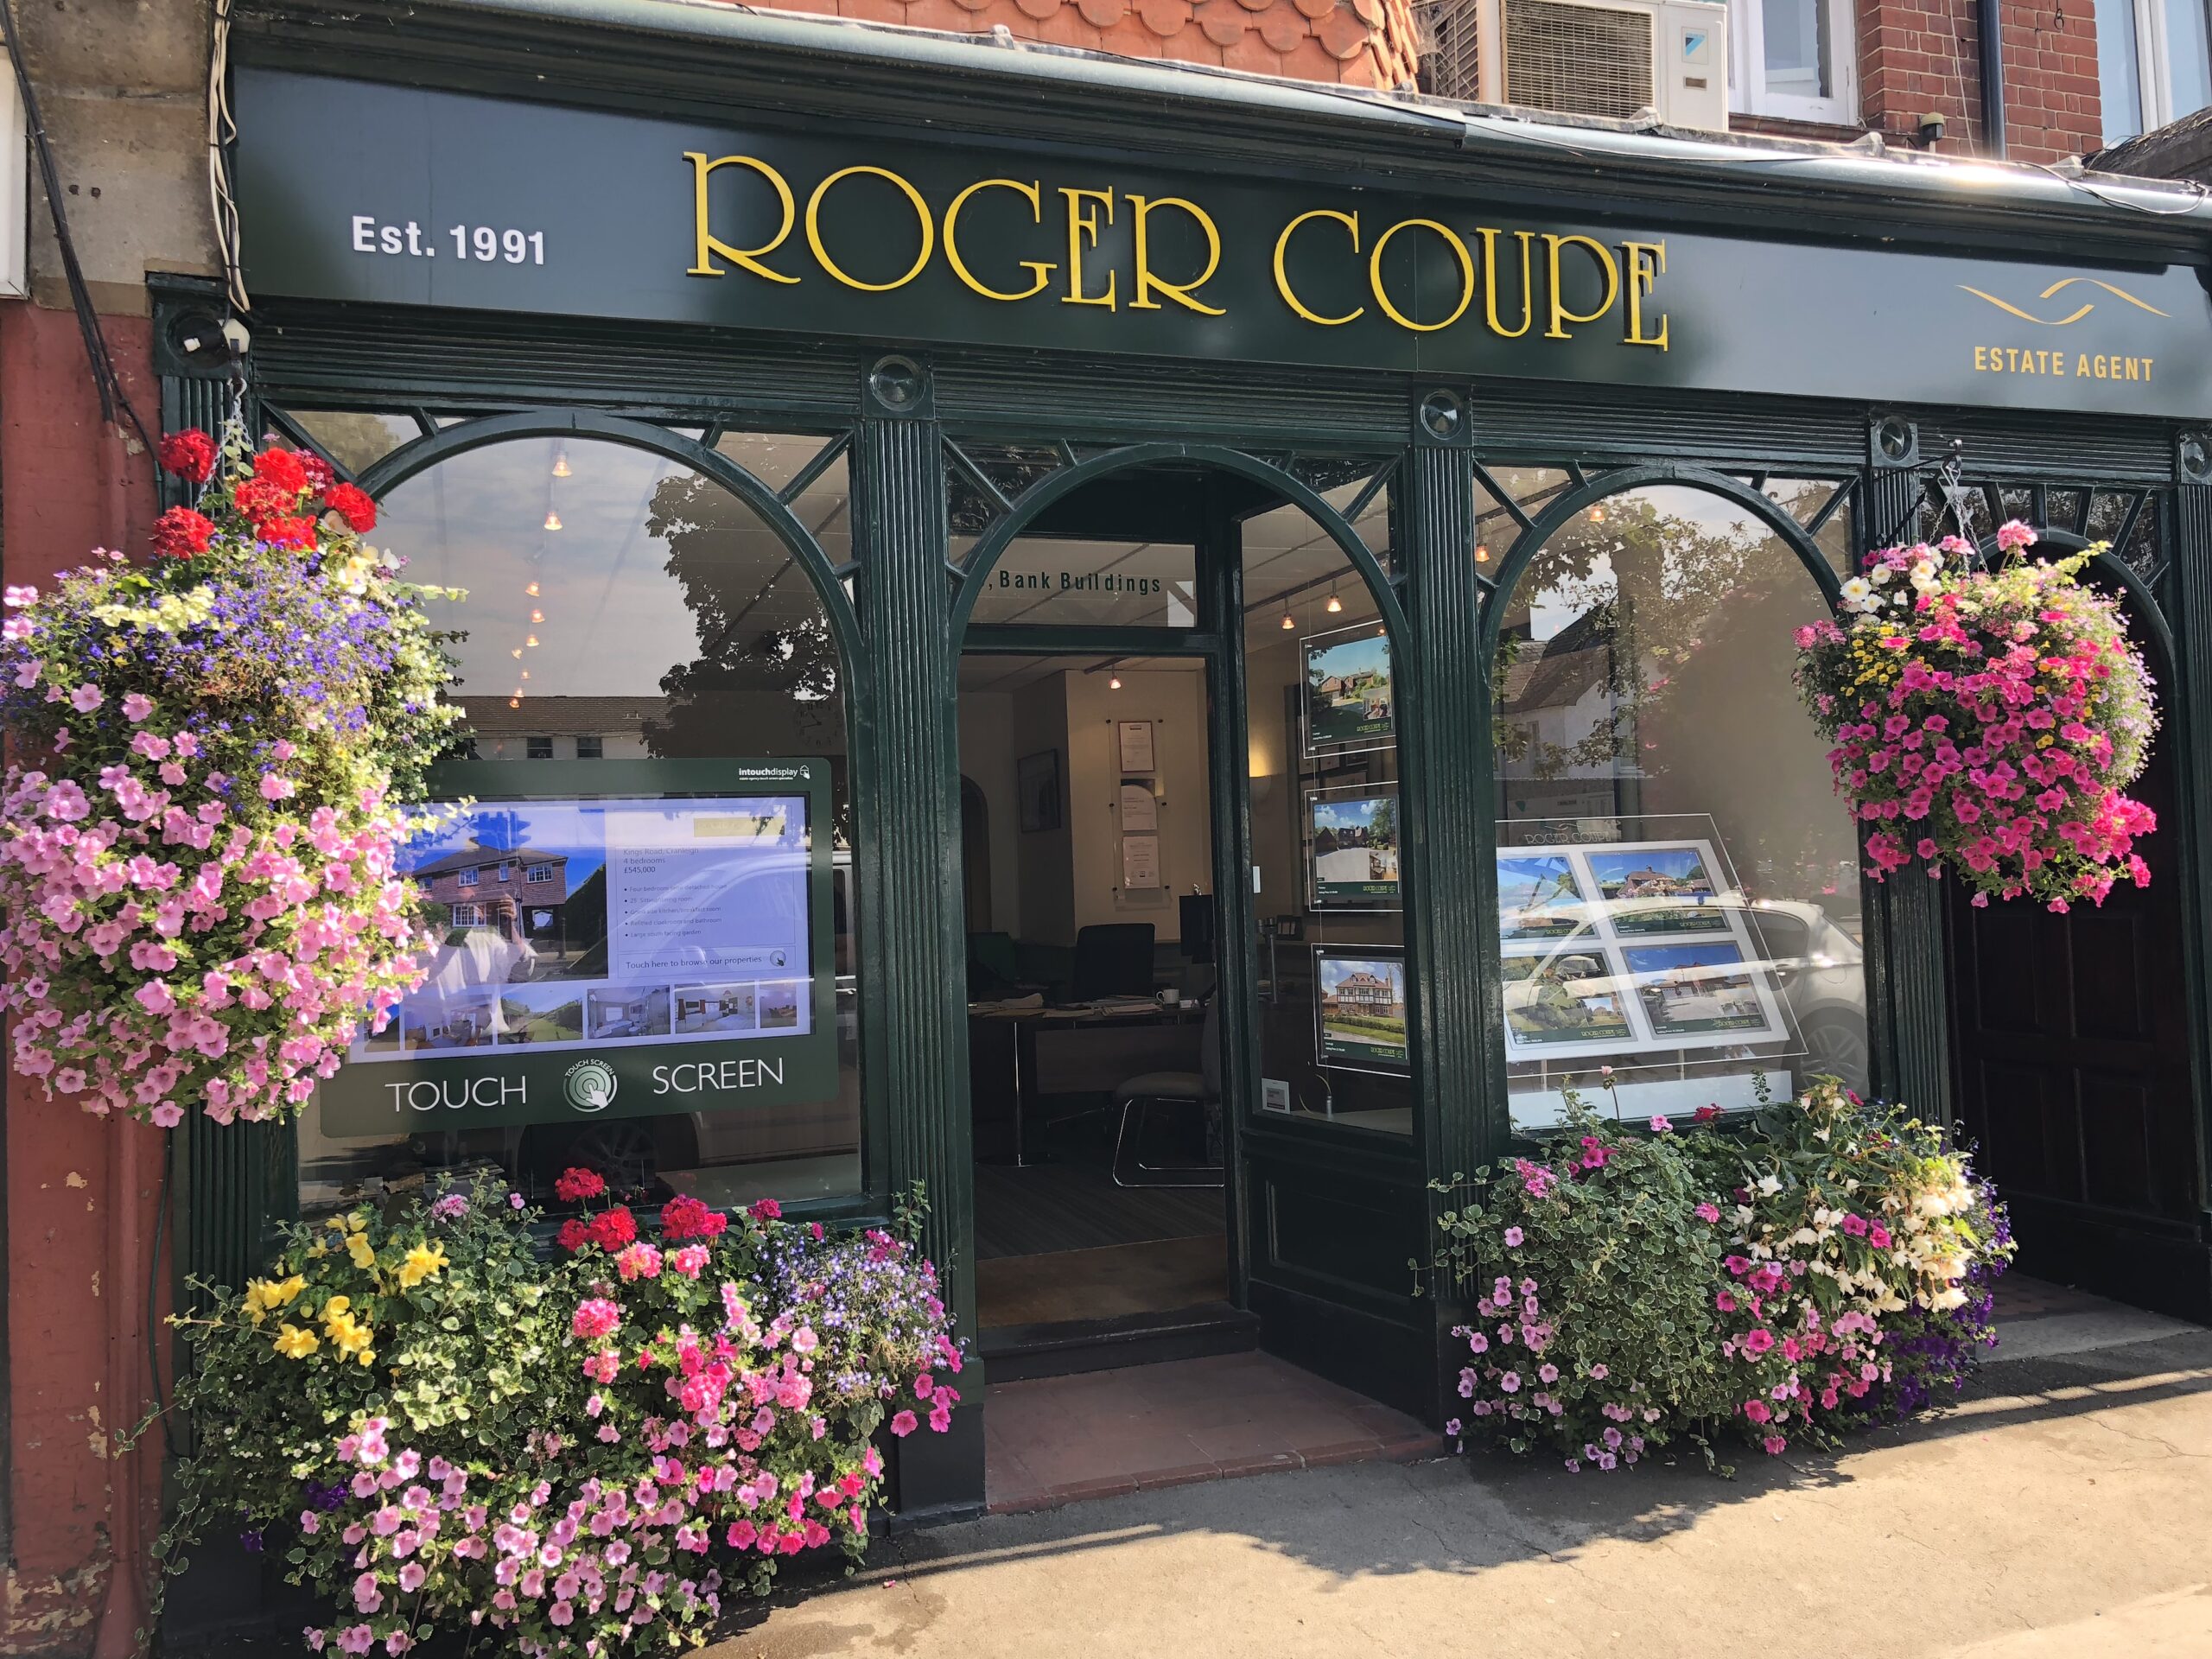 Roger Coupe Estate Agents